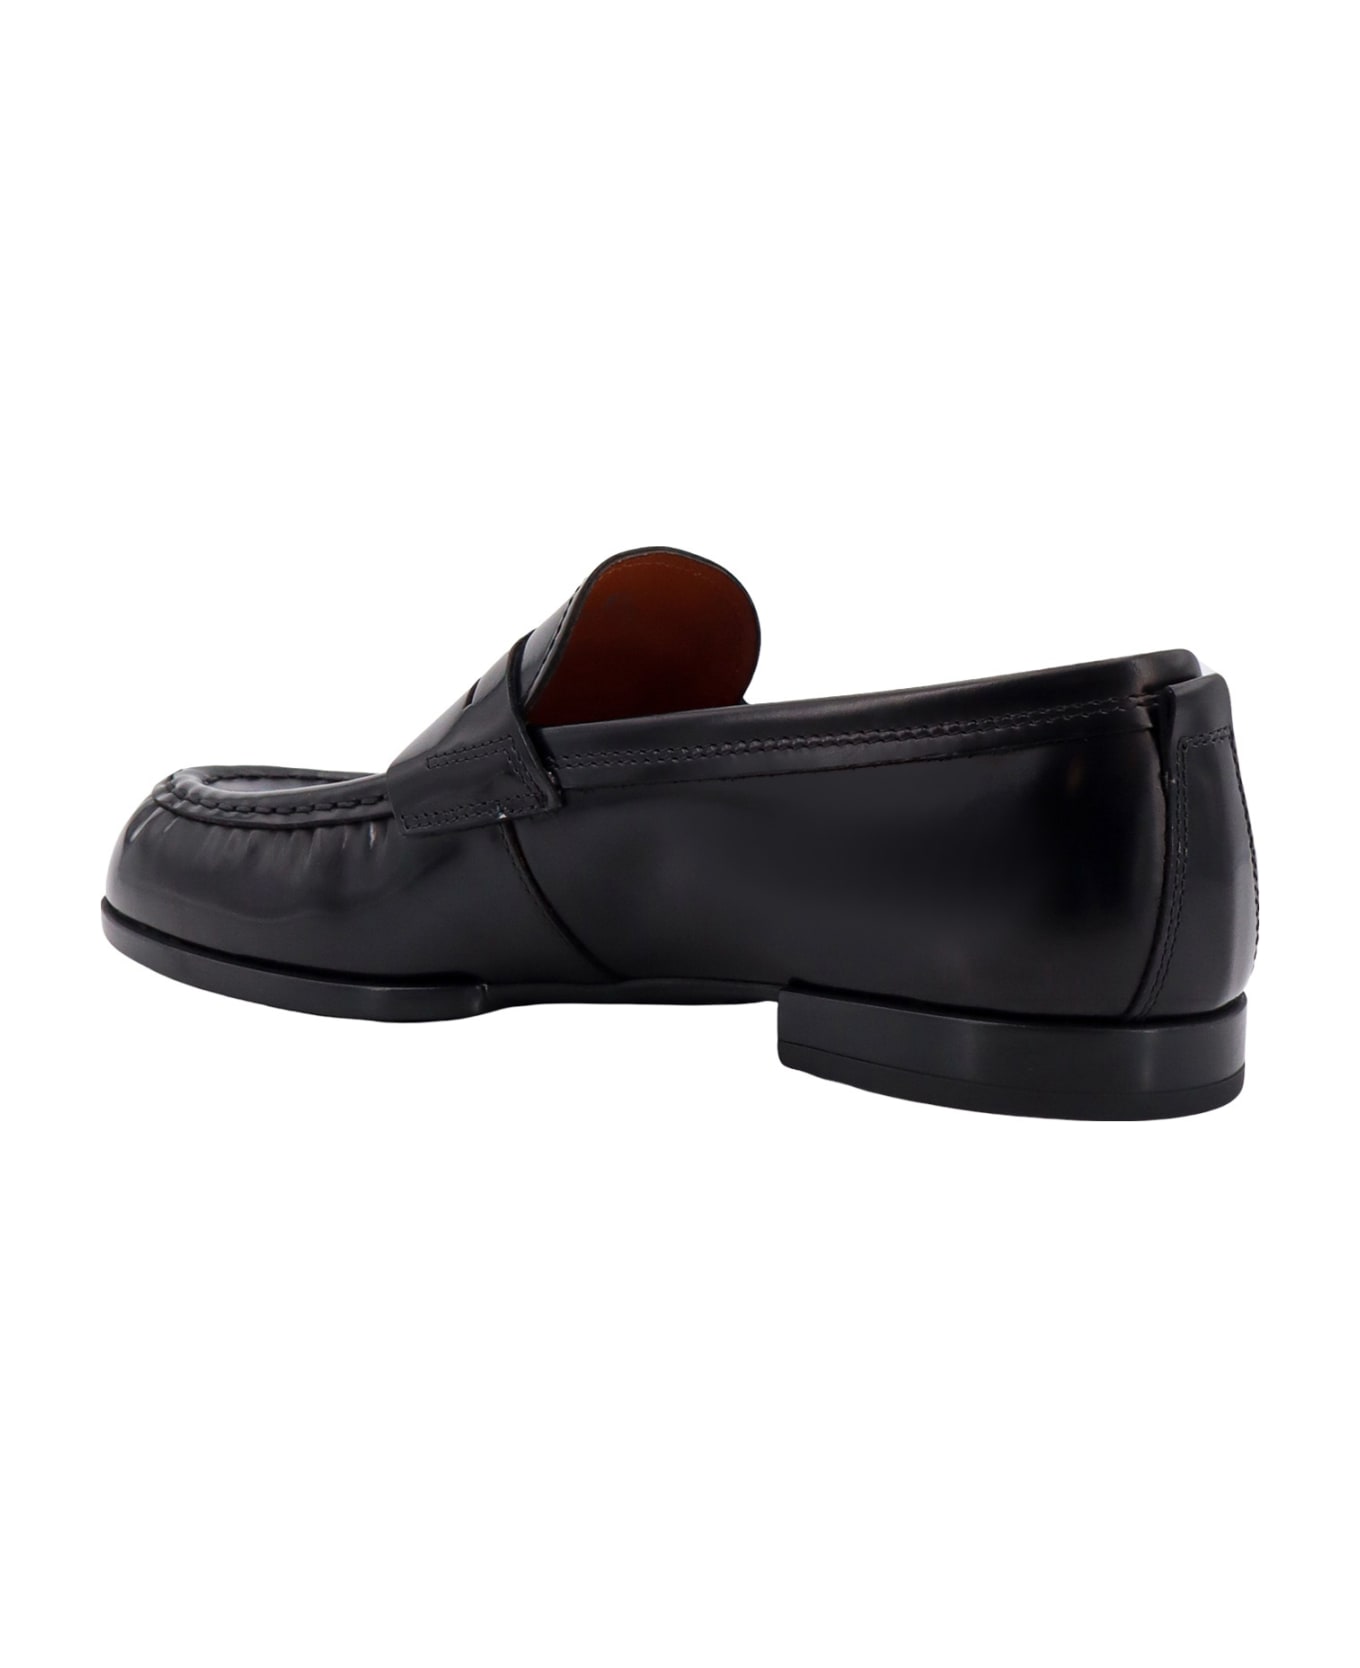 Tod's Loafer Almond Toe Slip-on Loafers - Black ローファー＆デッキシューズ